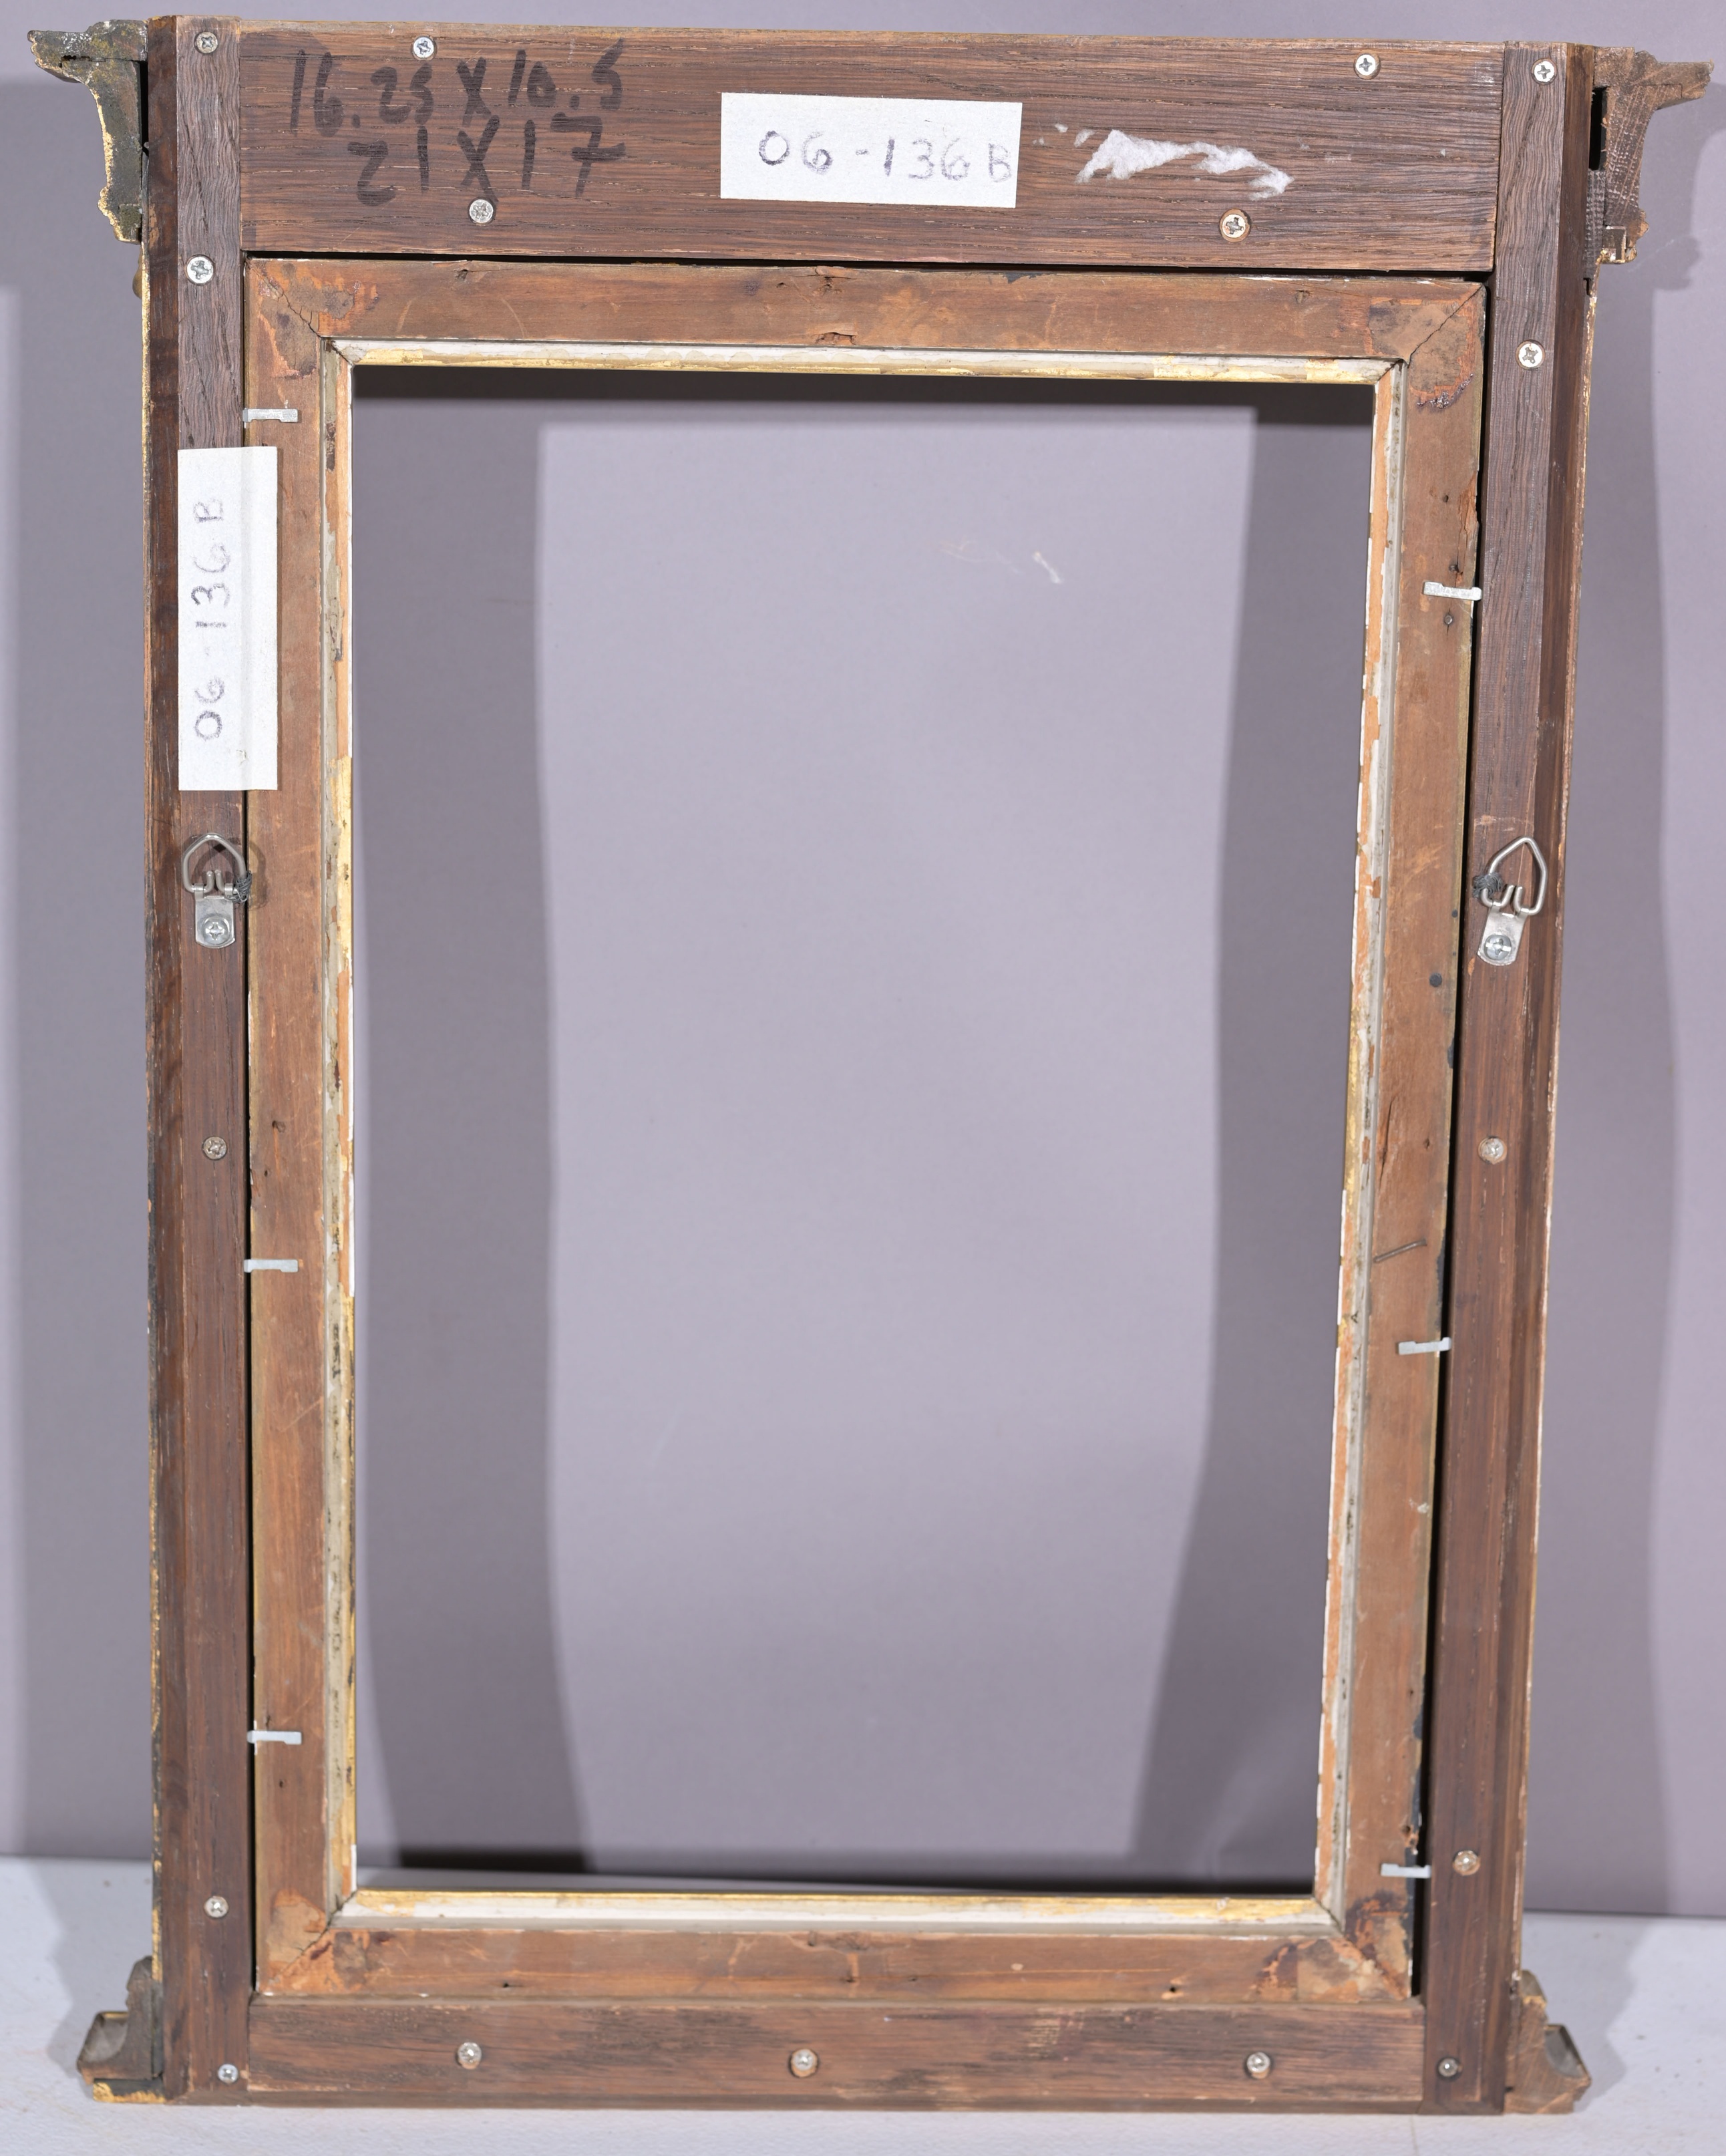 Antique Gilt Tabernacle Frame - 16.25 x 10.5 - Image 6 of 6